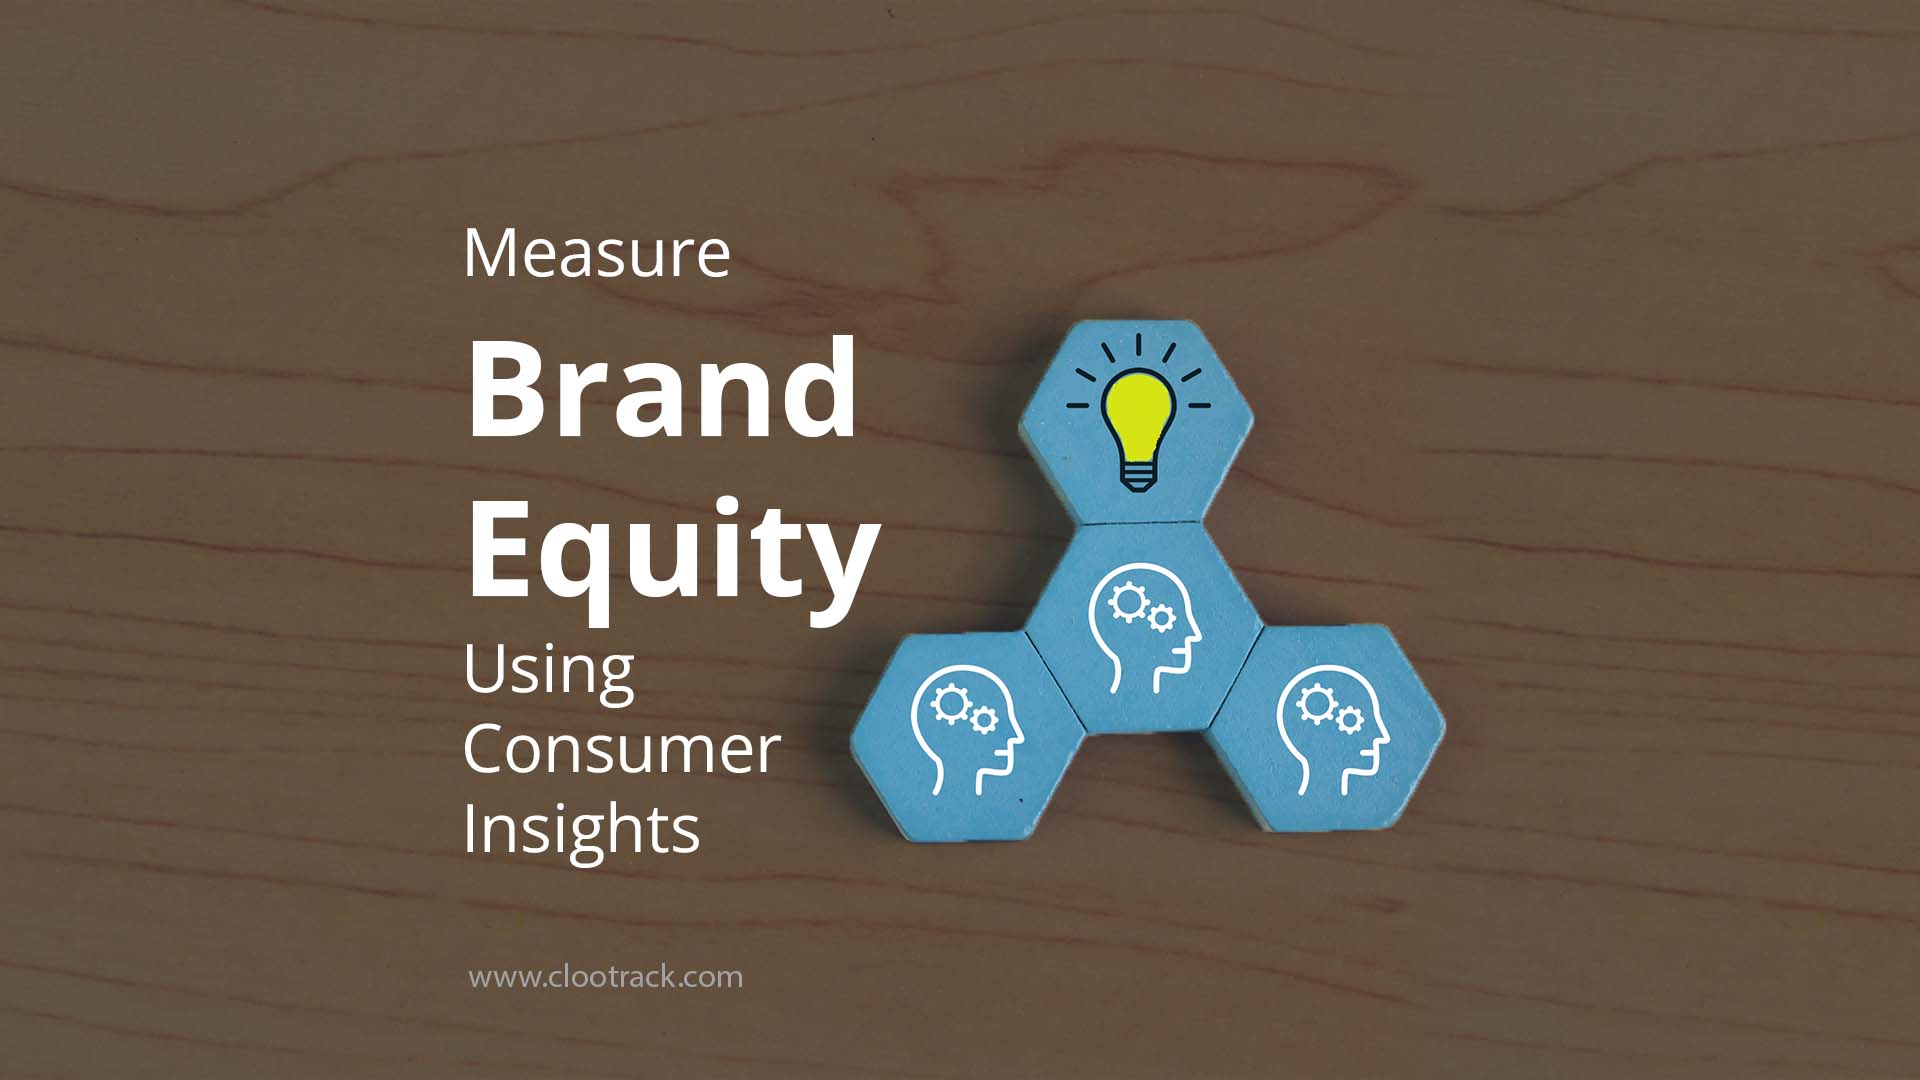 6 Ways to Measure Brand Equity Using Consumer Insights